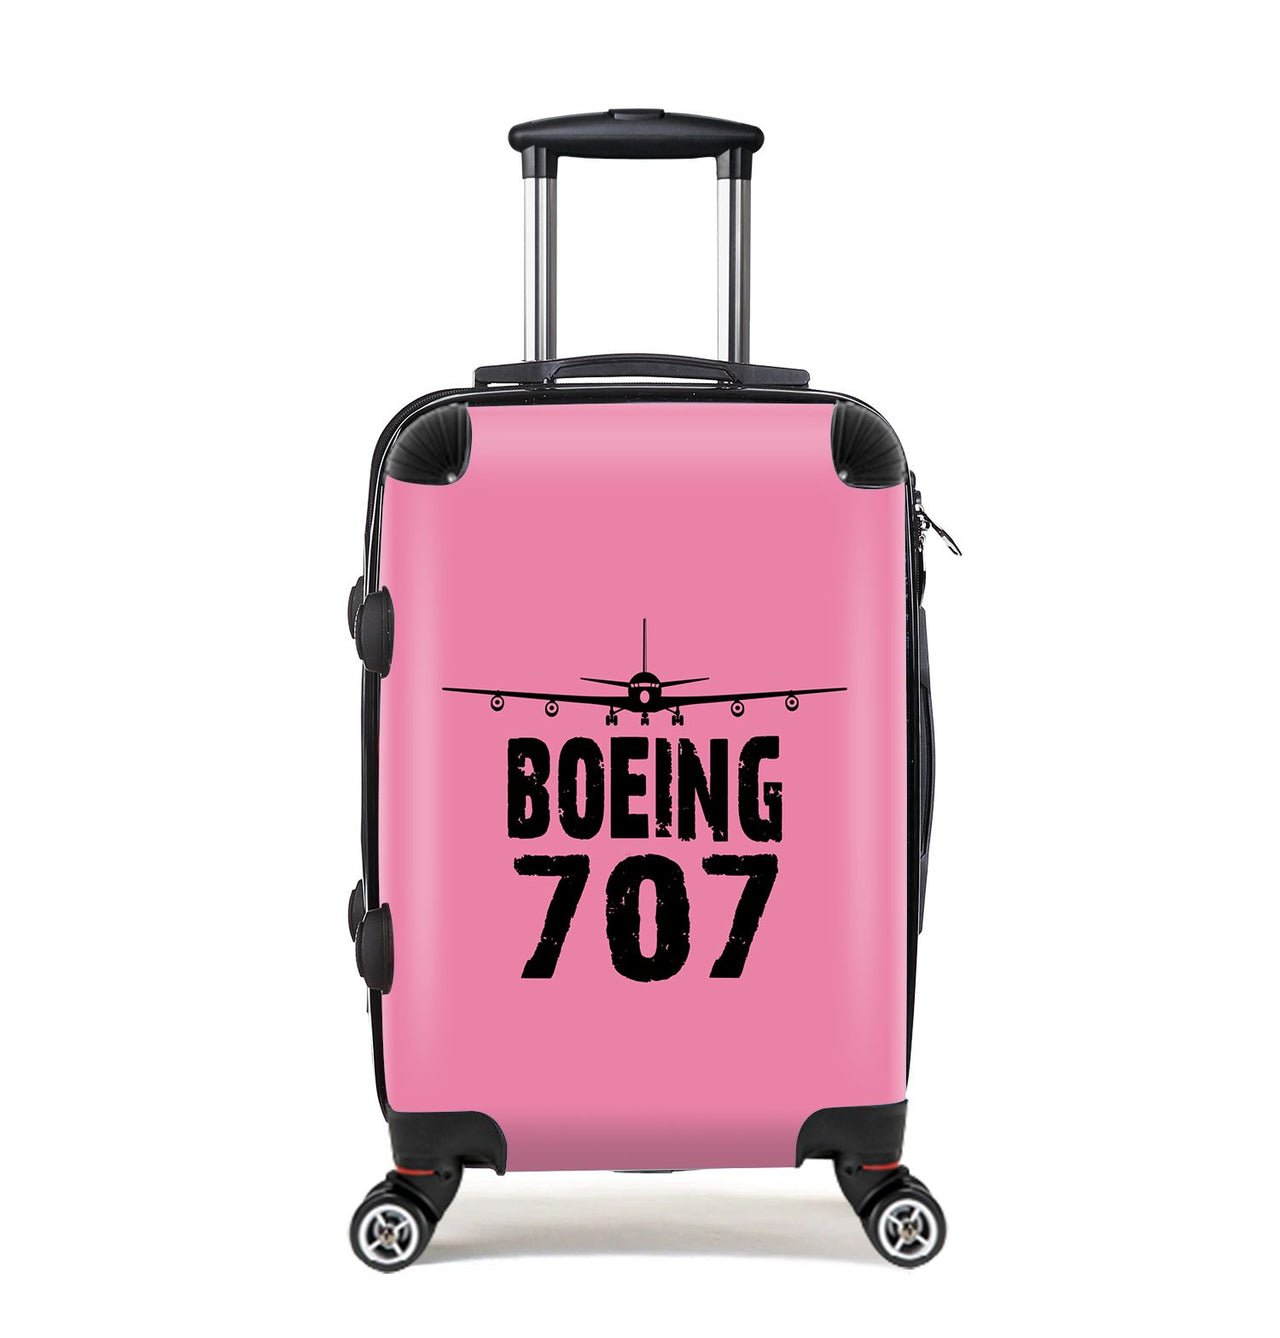 Boeing 707 & Plane Designed Cabin Size Luggages